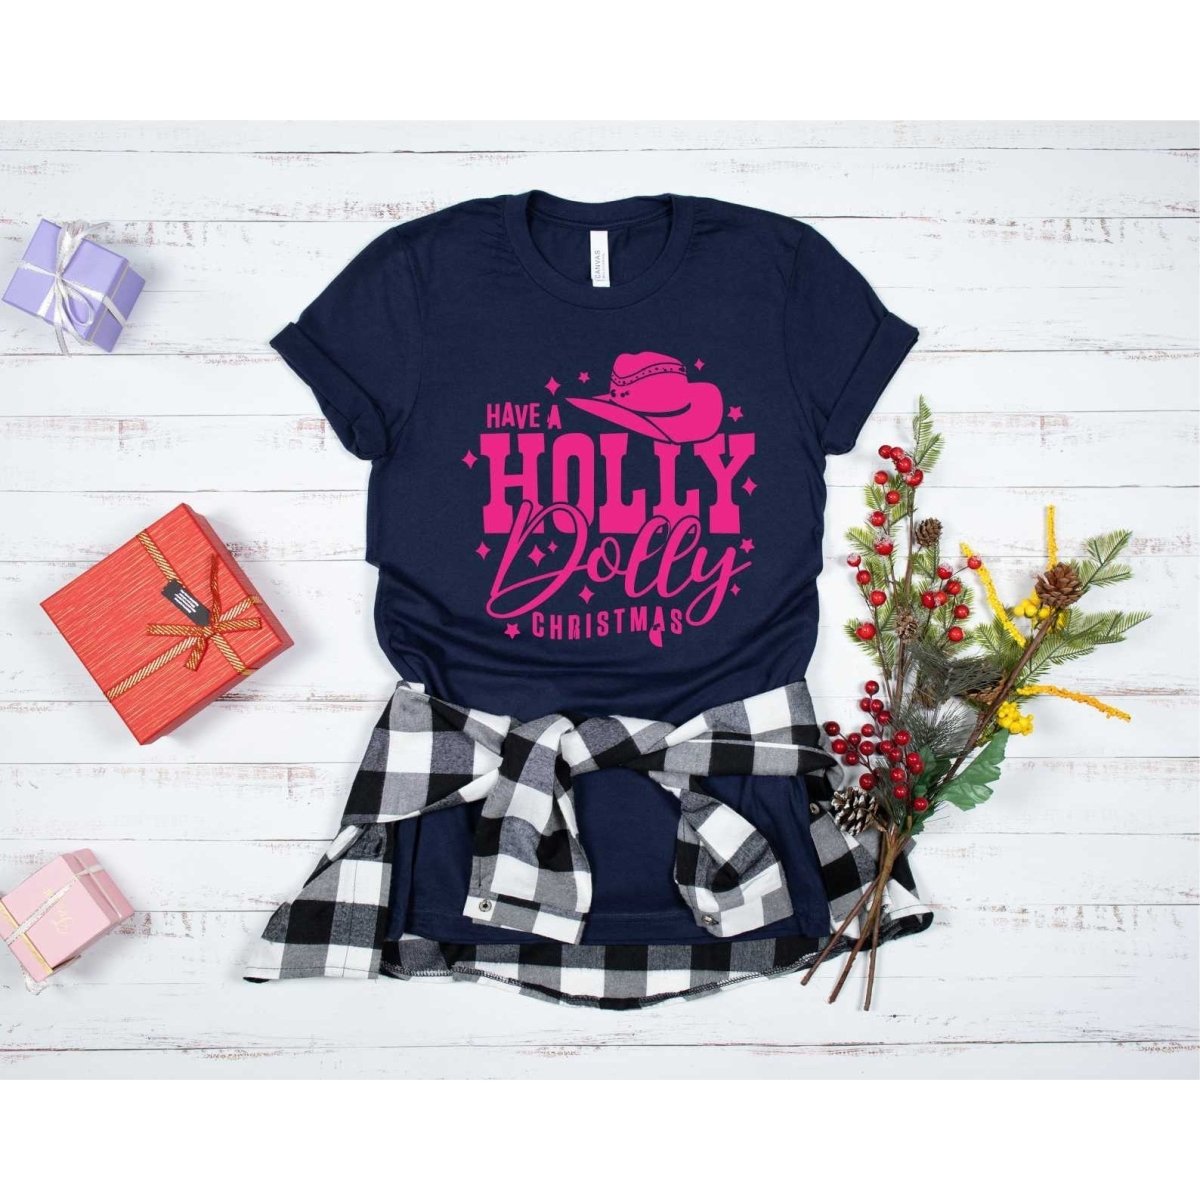 Holly Dolly Christmas Graphic Tee - worldclasscostumes